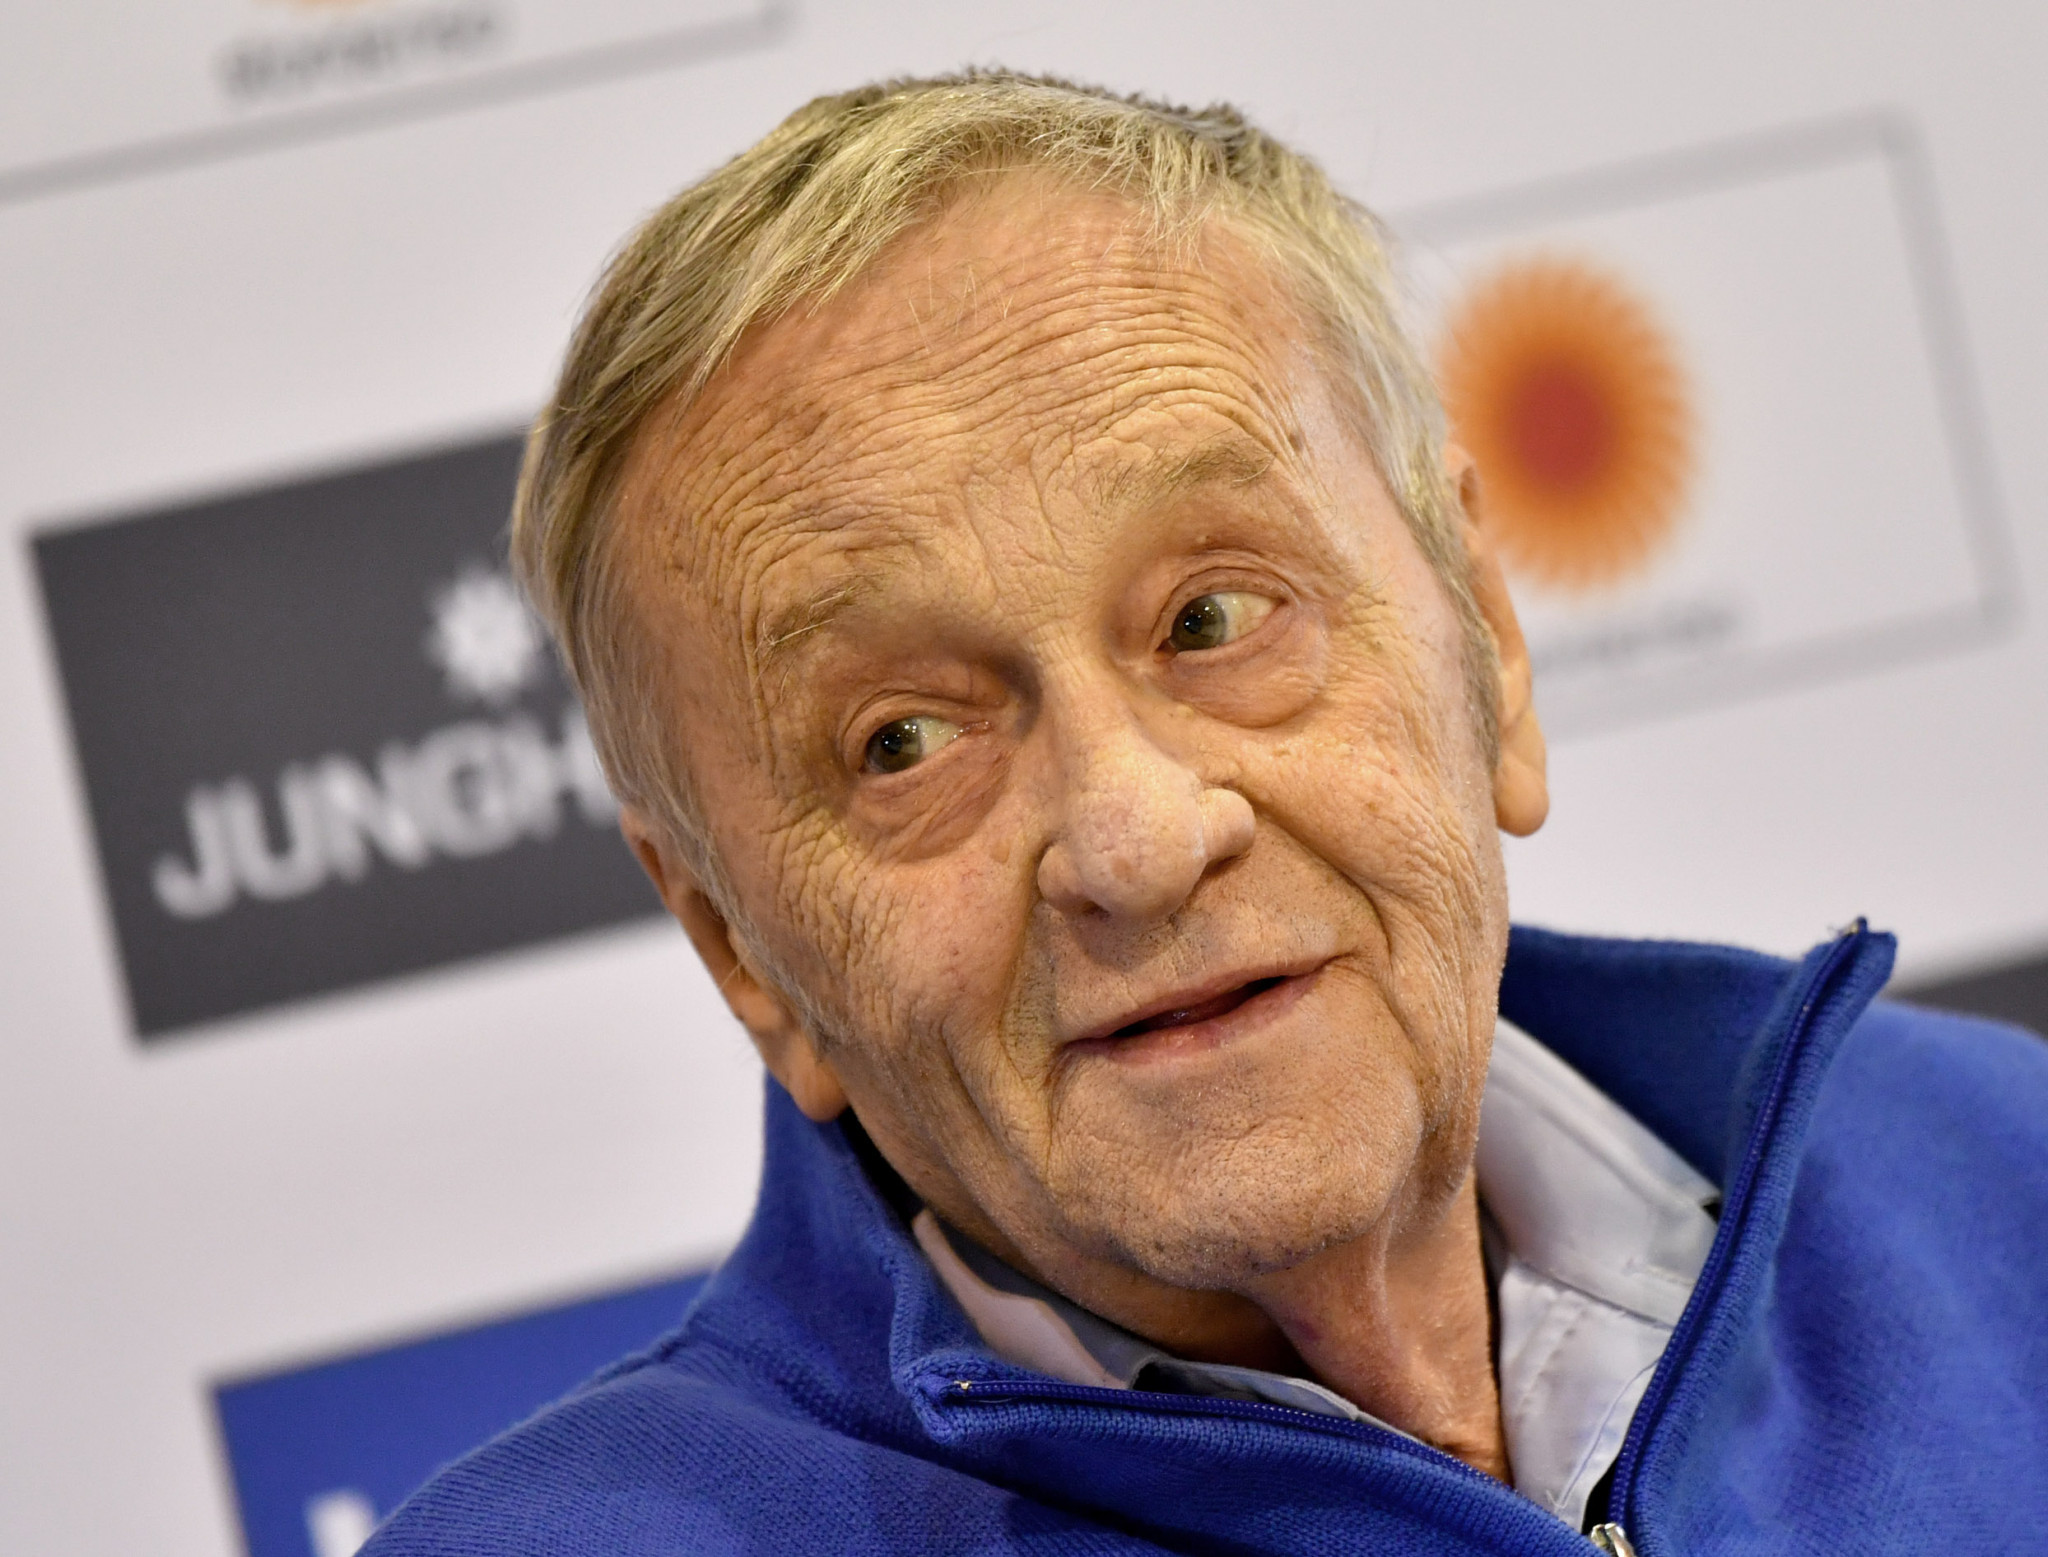 Gian-Franco Kasper's reign will go on after the International Ski Federation elections were delayed ©Getty Images